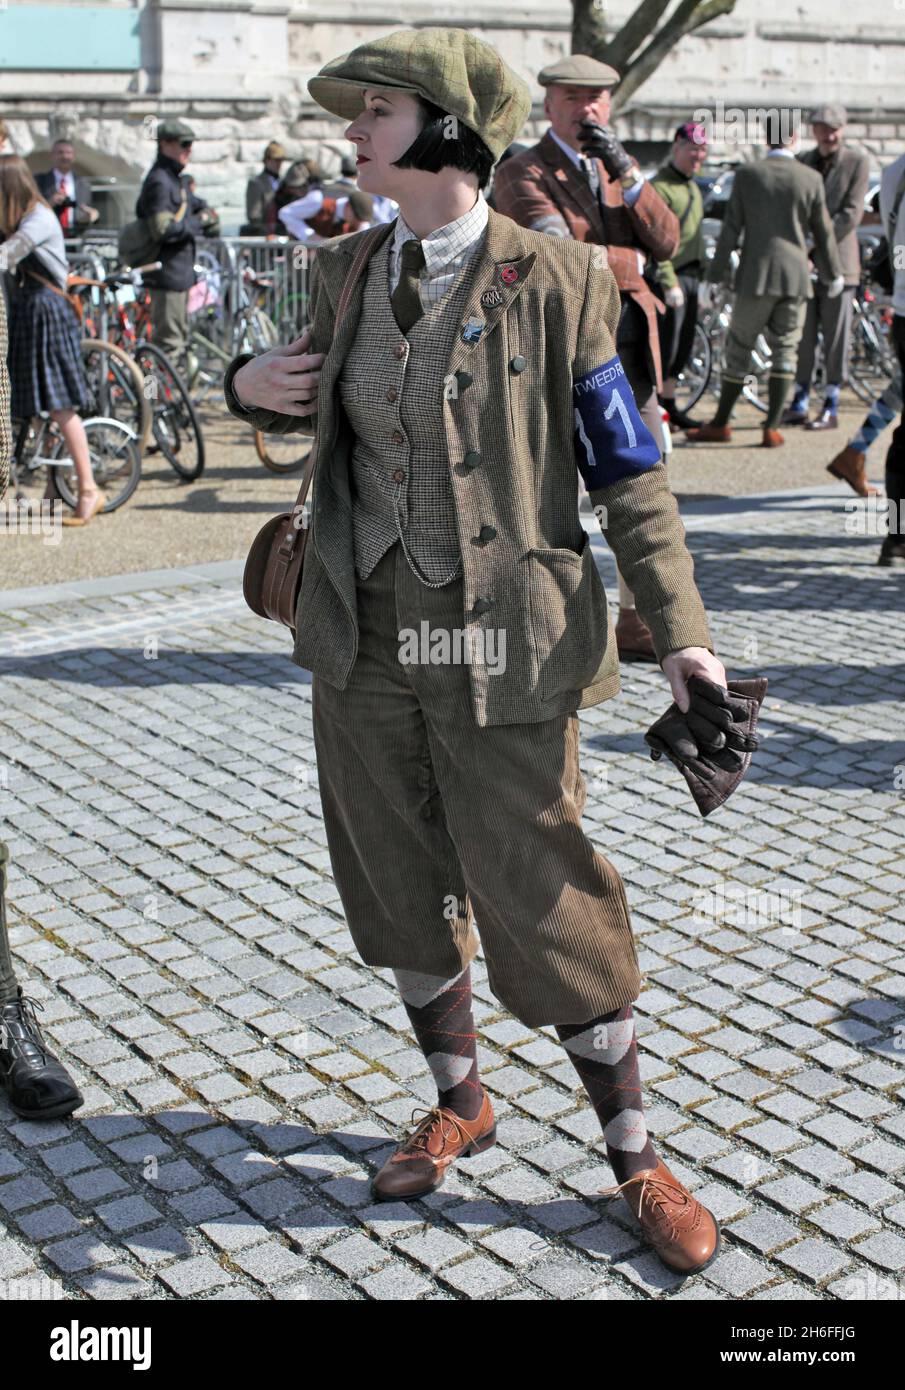 The 2nd Annual Tweed Run took place in London today. 400 ladies and  gentlemen, dressed in plus-fours, Harris tweed jackets, merino wool team  jerseys, silk cravats and jaunty flat caps, took a